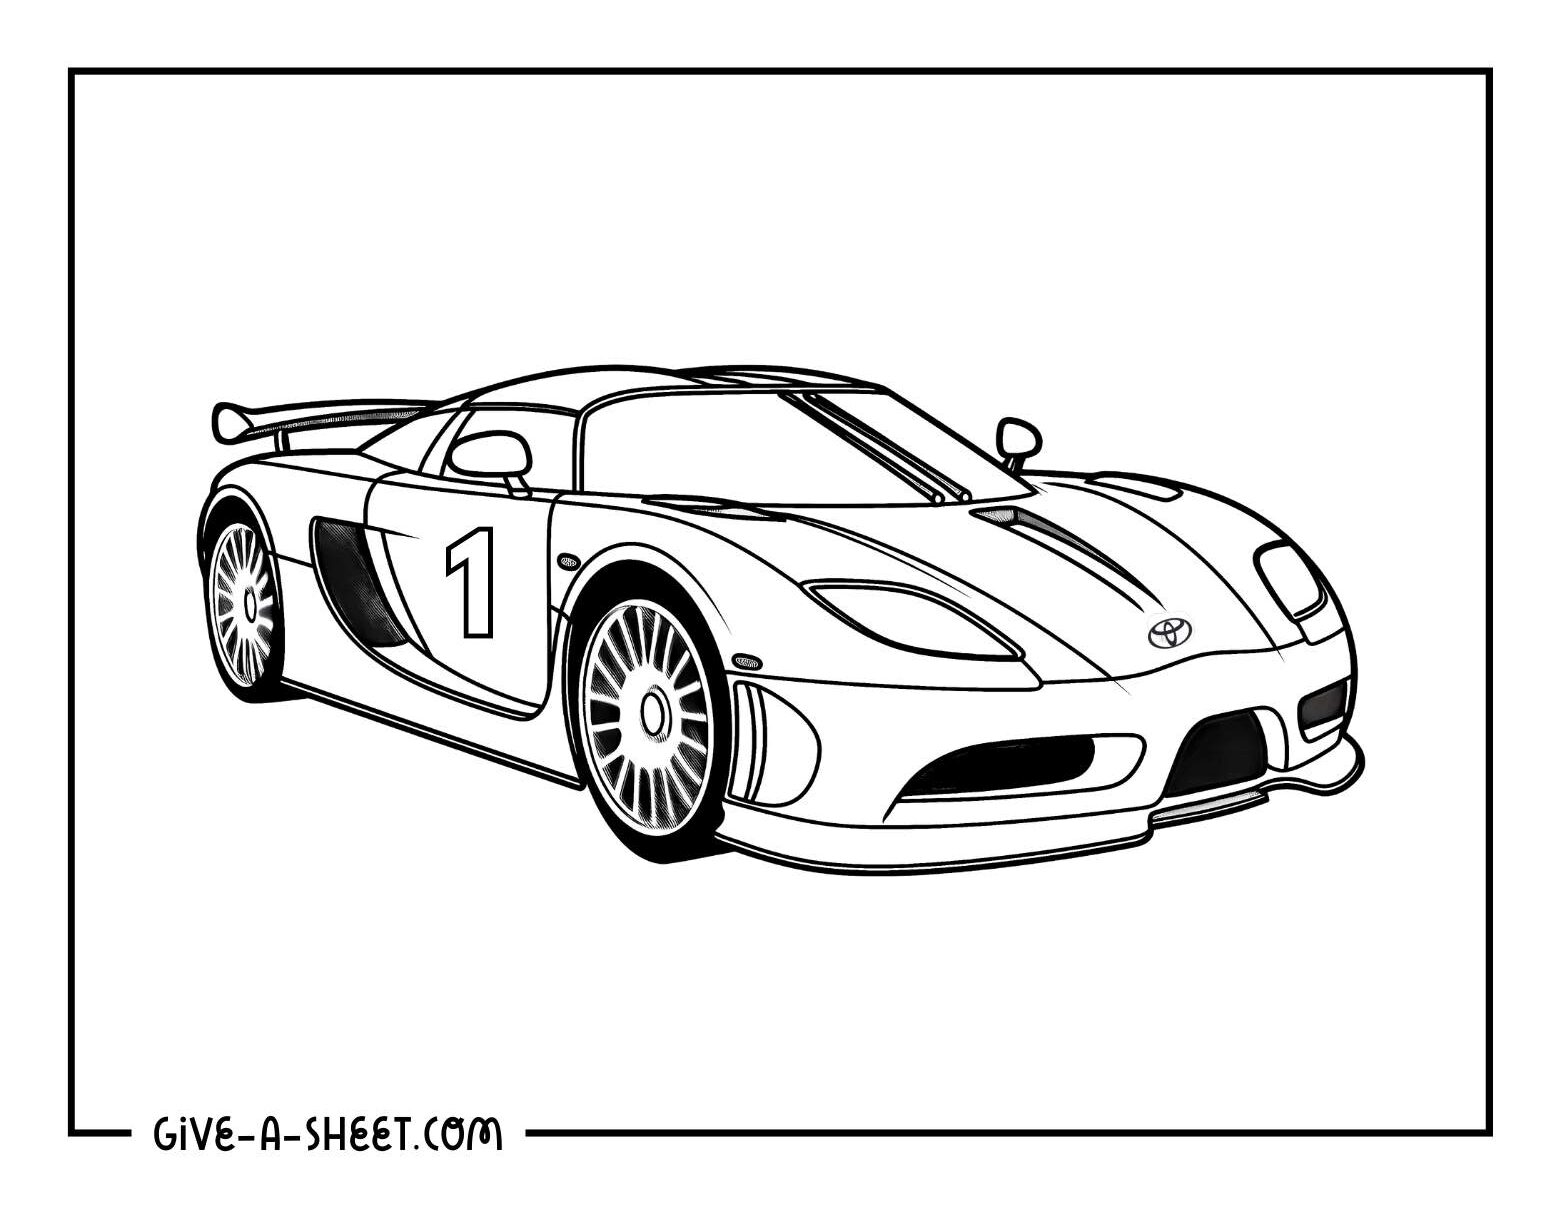 Toyota nascar coloring page.